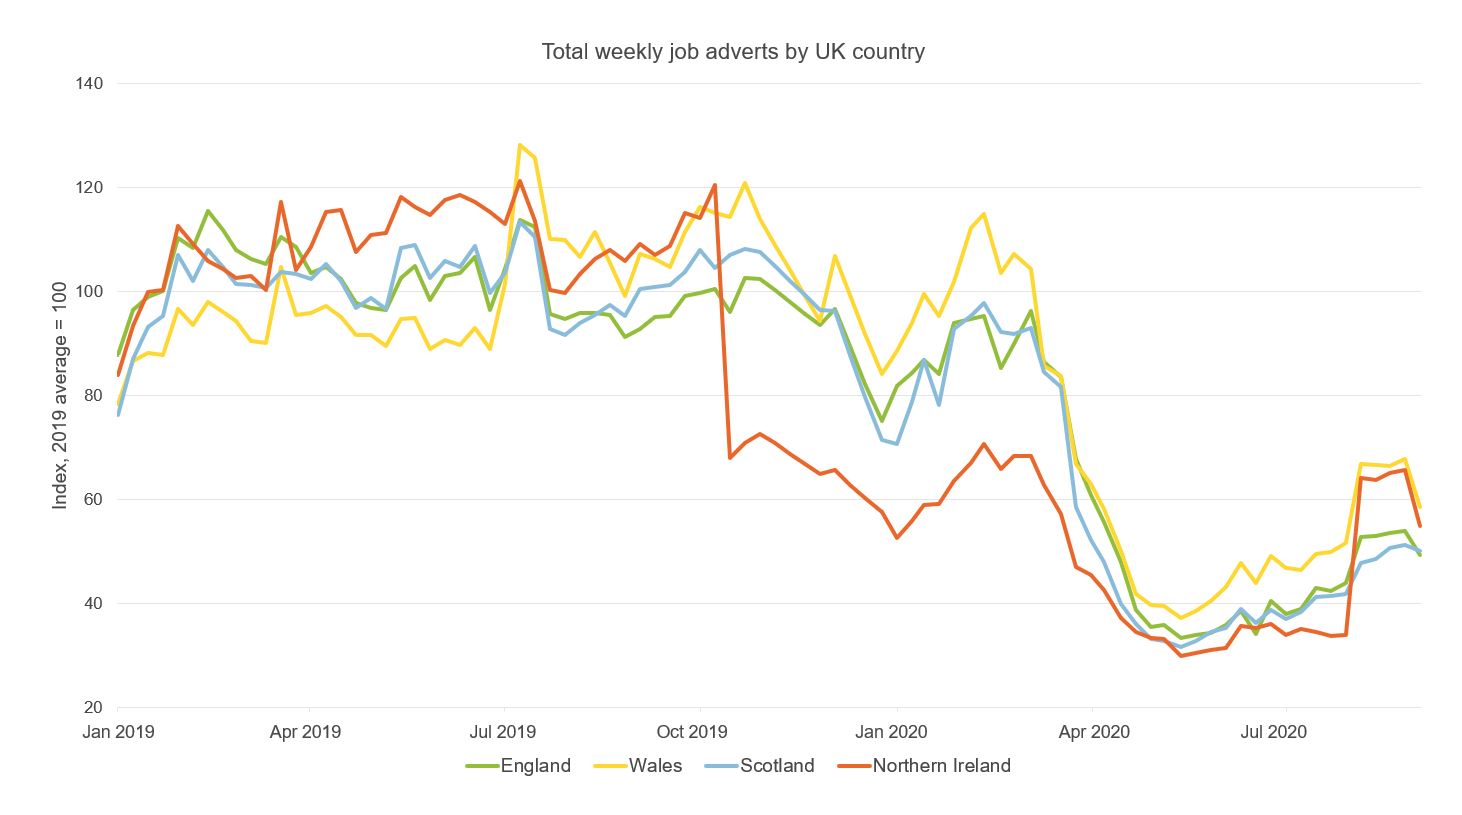 Figure showing total weekly job adverts by UK country